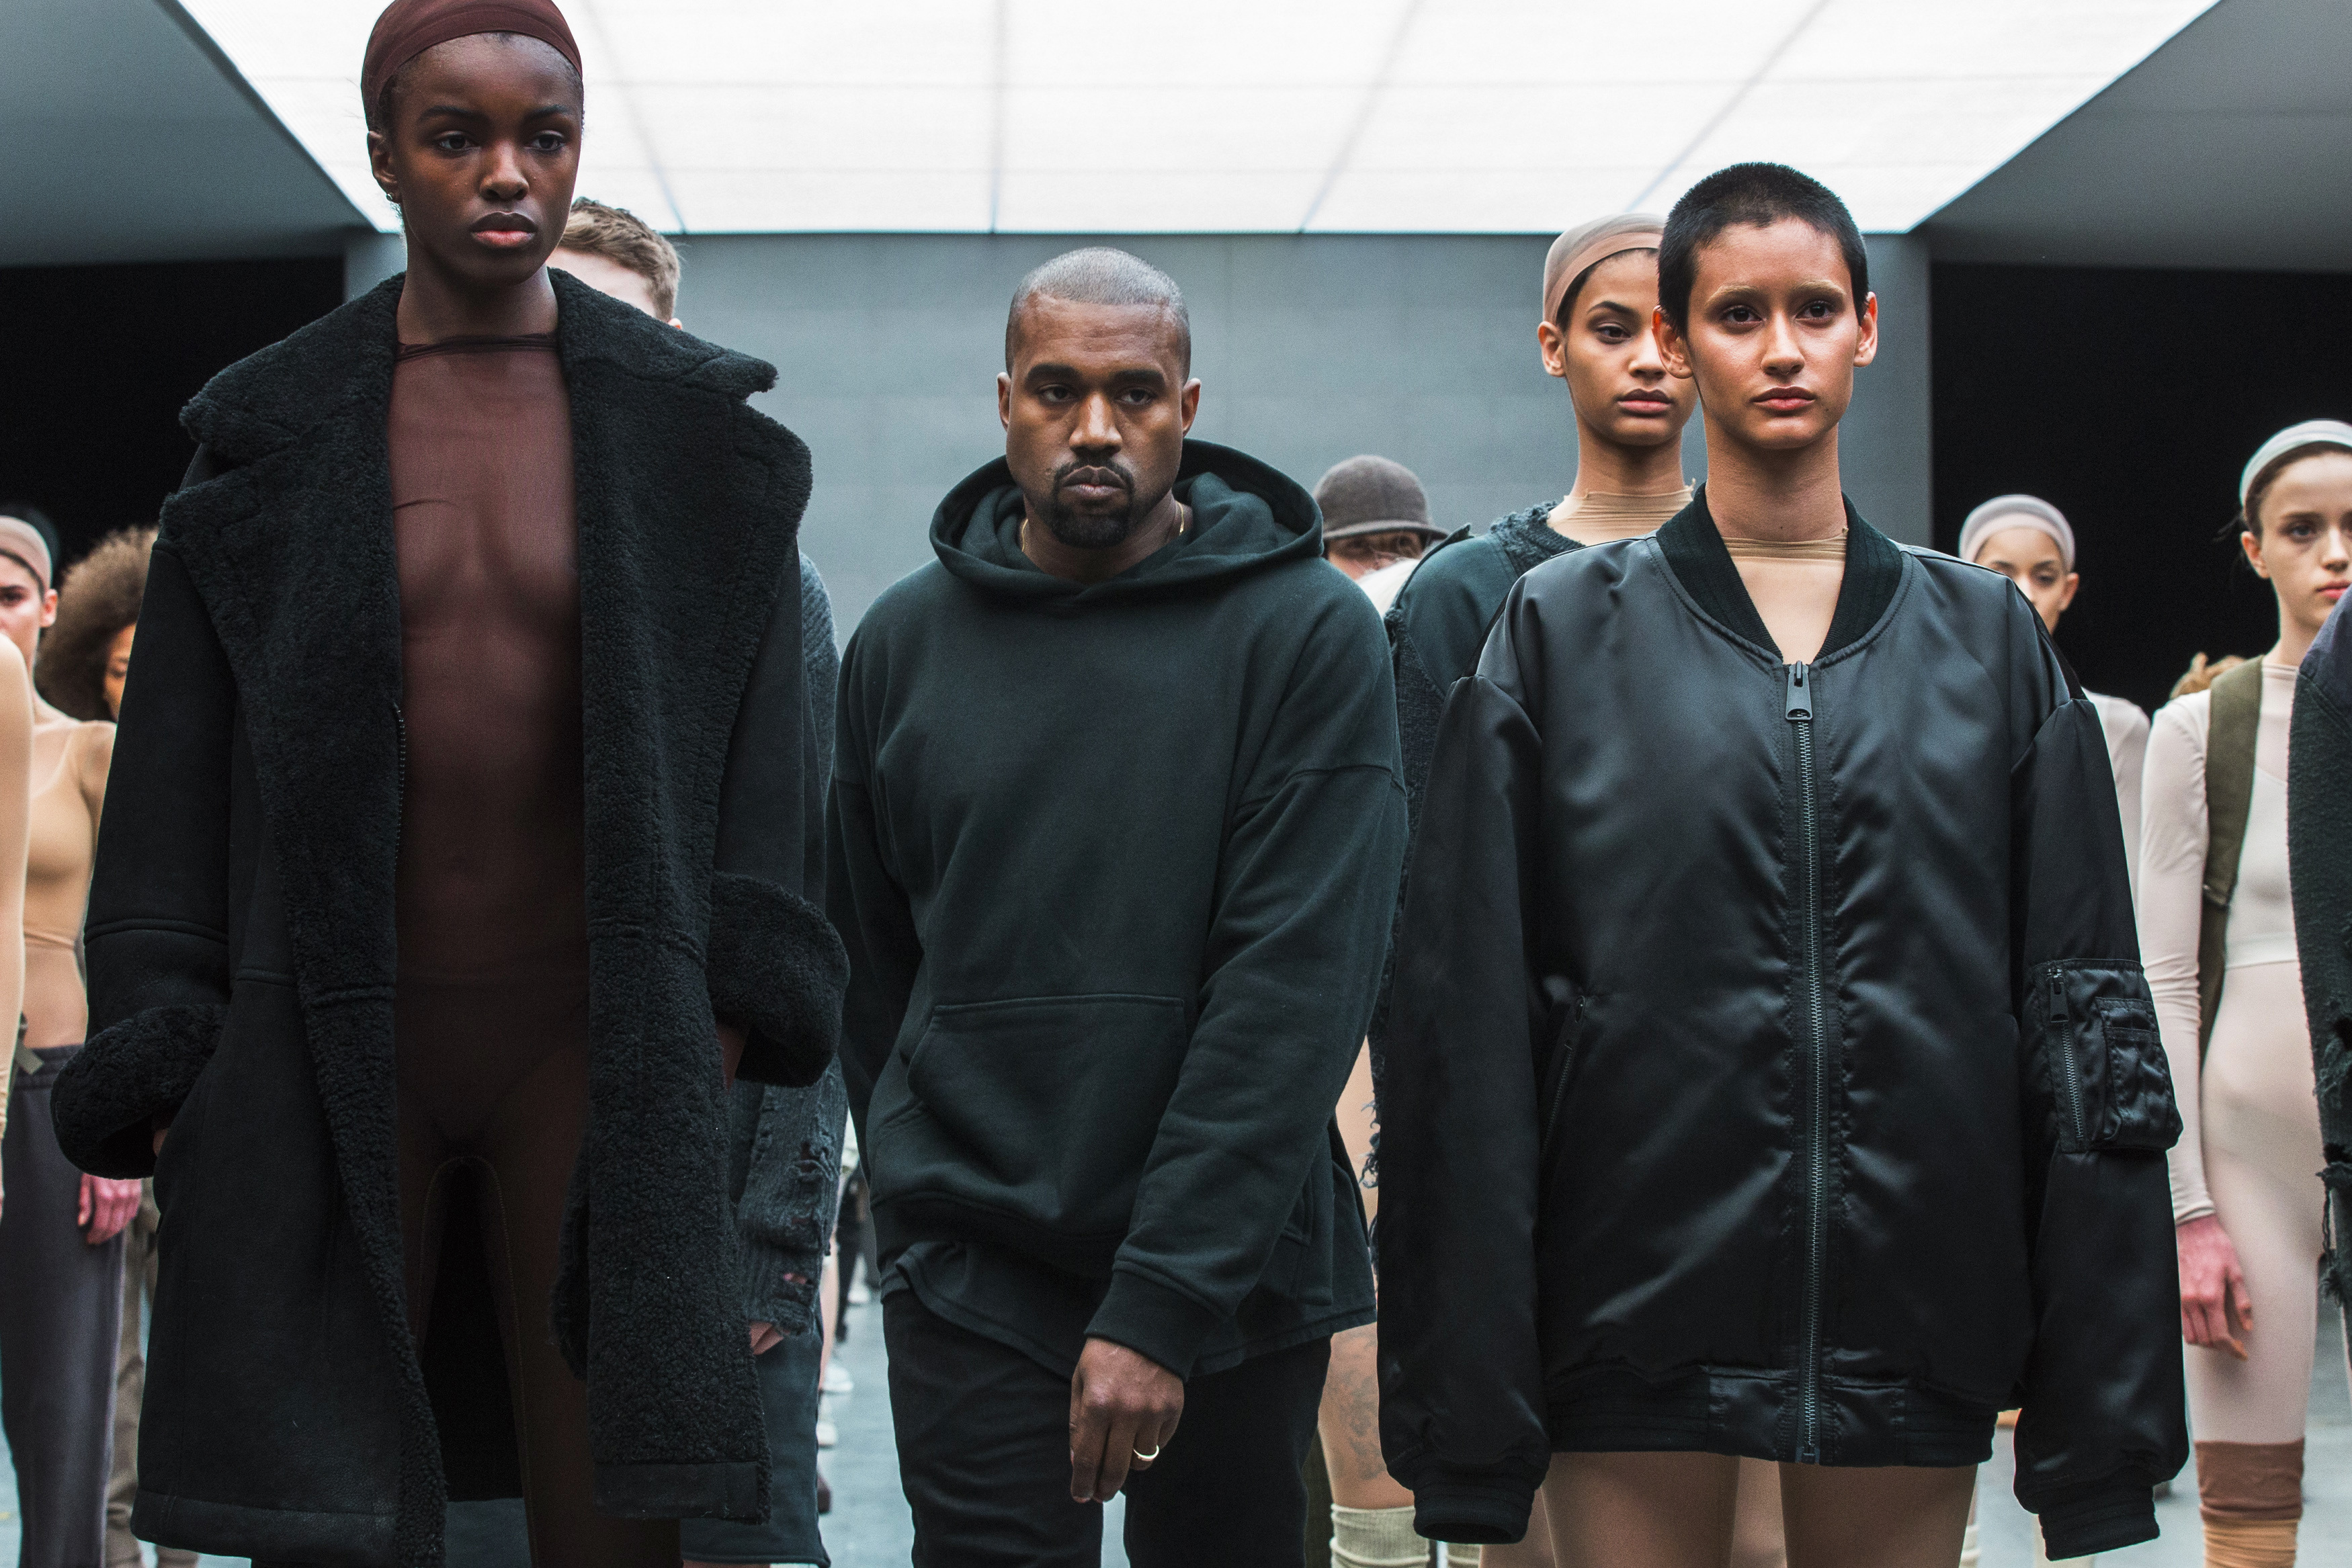 Singer Kanye West walks past models after showcasing his Fall/Winter 2015 partnership line with Adidas at New York Fashion Week